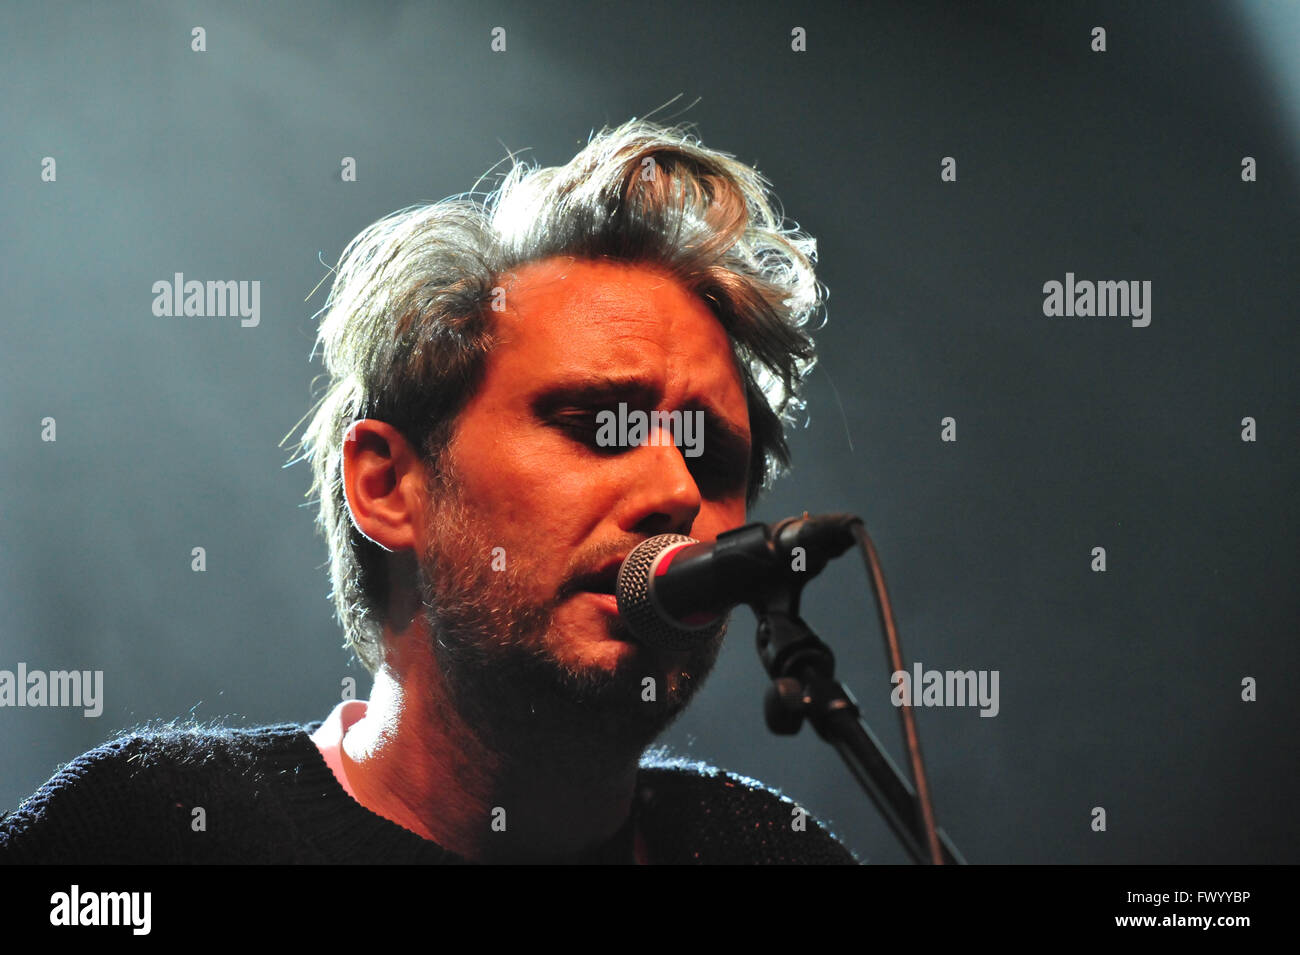 223 / Tocotronic: EUROPA, DEUTSCHLAND, HAMBURG, 17.10.2015: Tocotronic live in der Hamburger Sporthalle. Editorial use only. Stock Photo